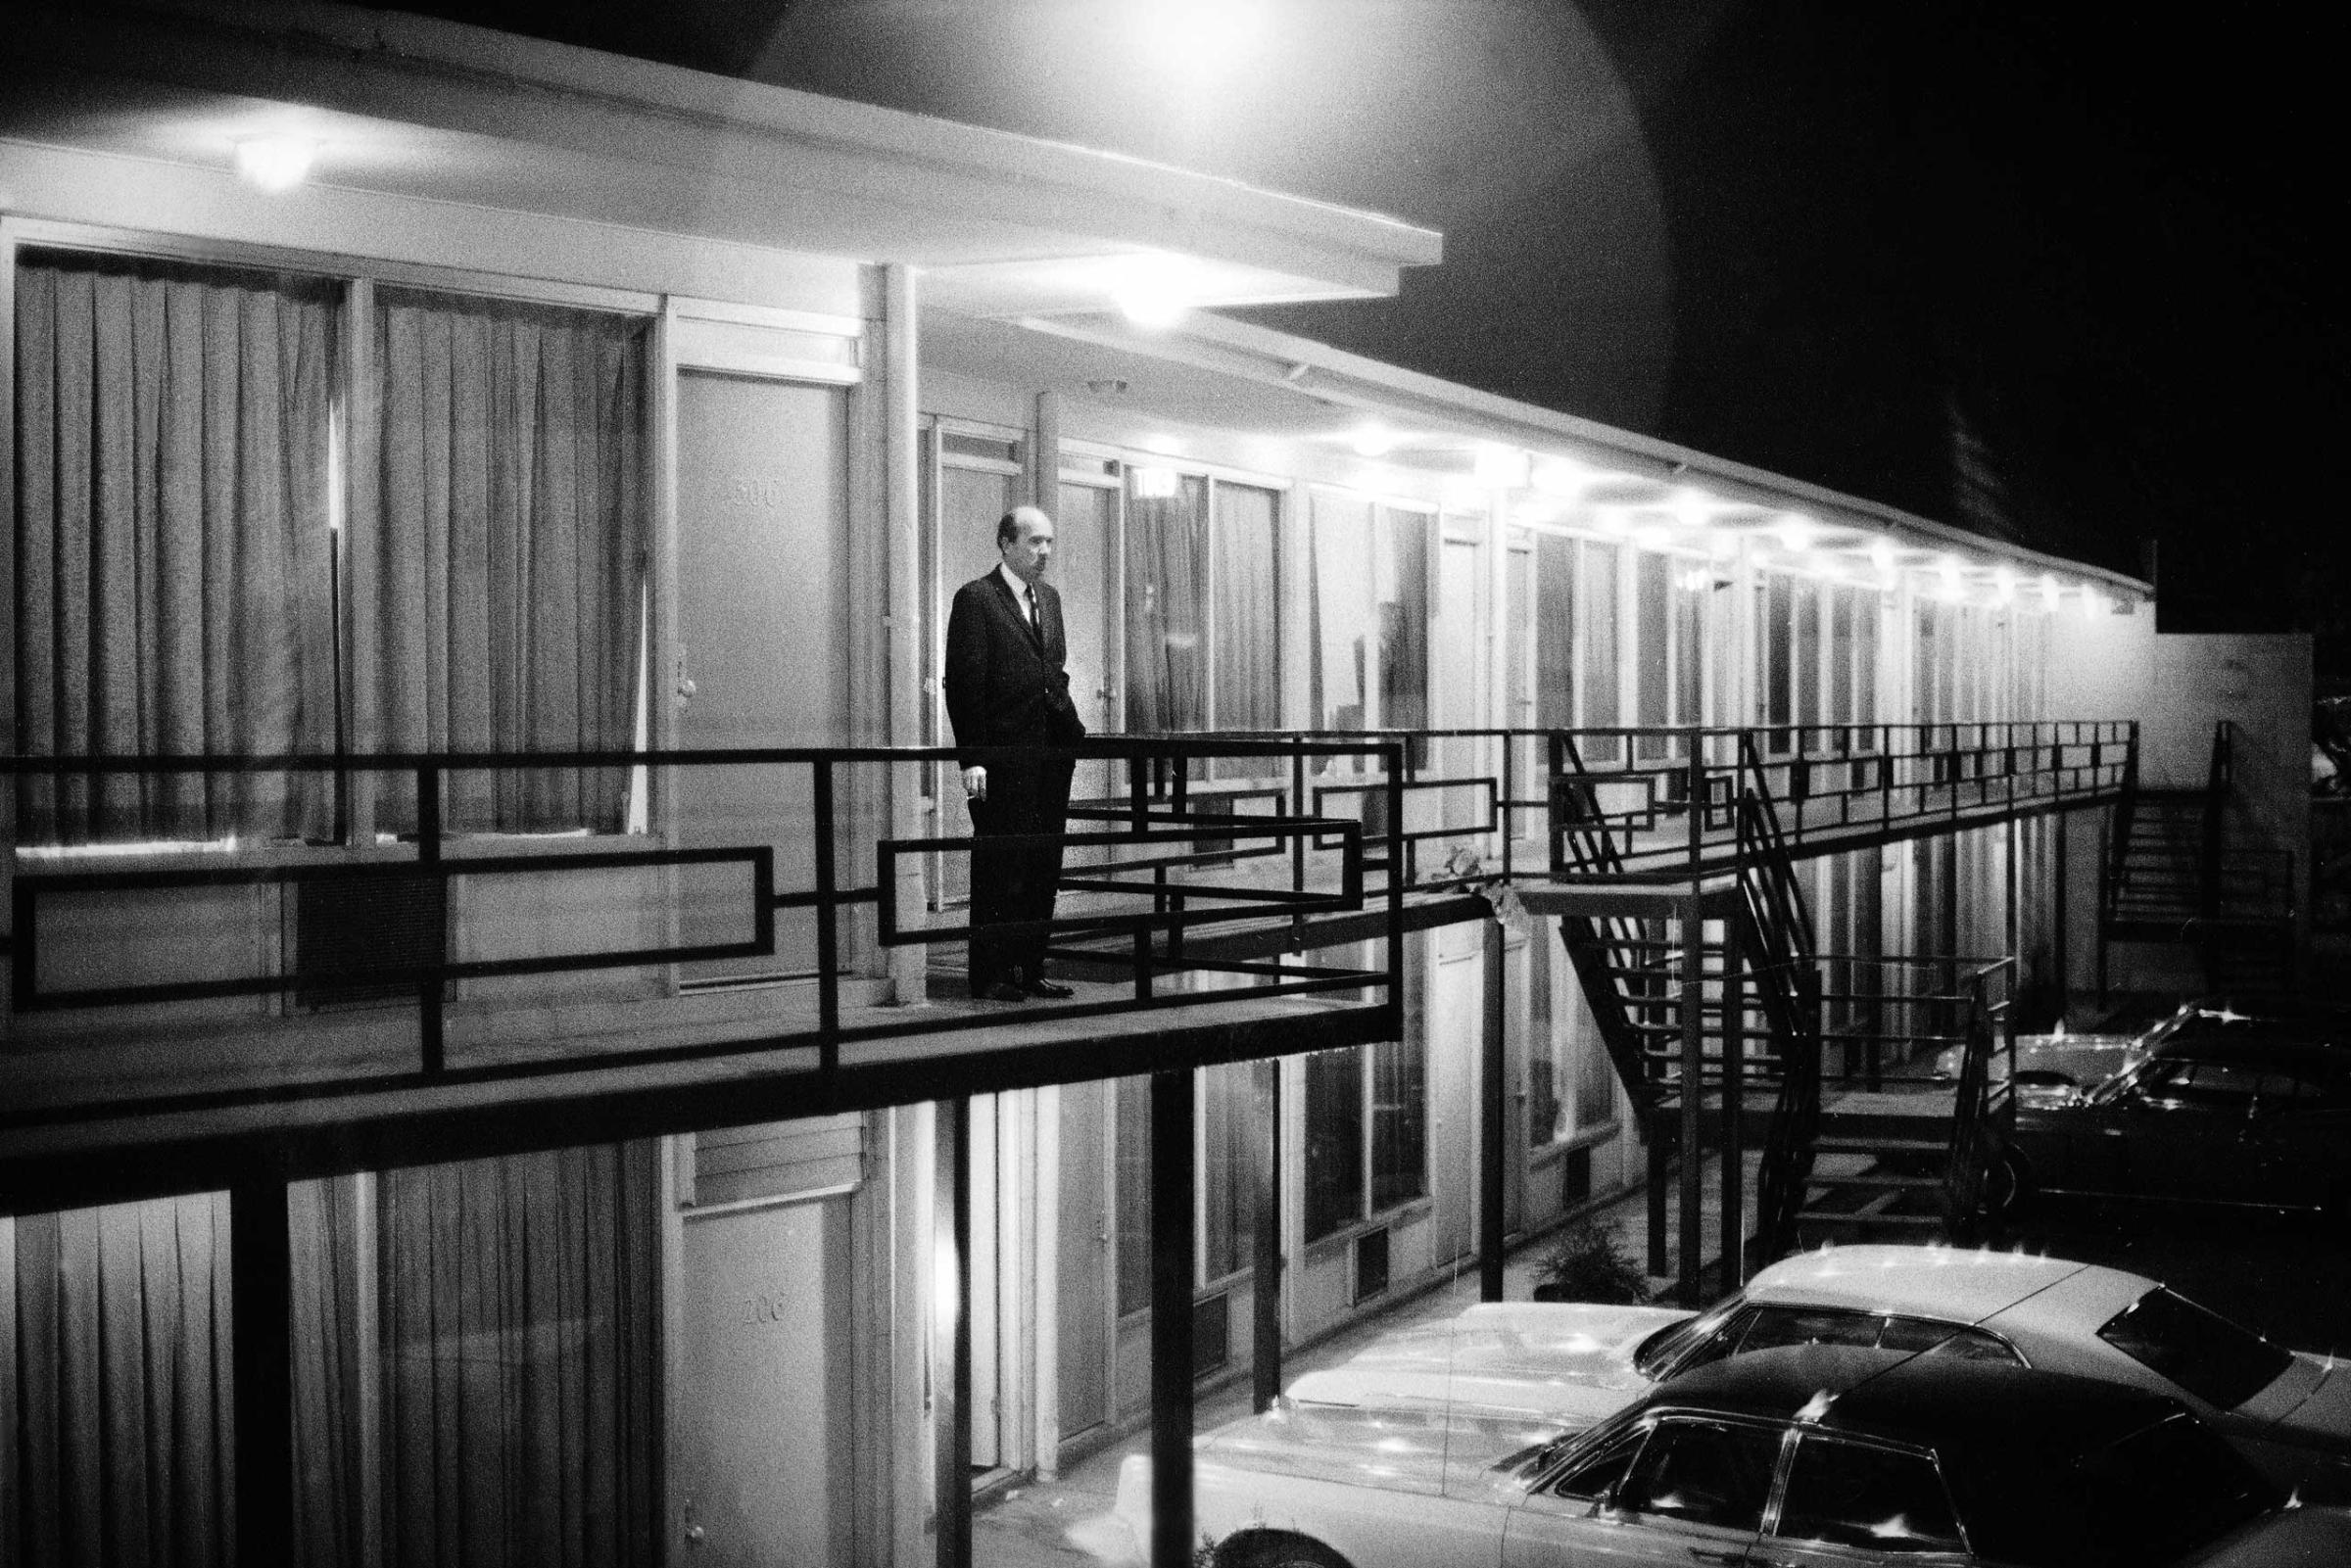 Will D. Campbell, alone on the Lorraine Motel balcony, gazes out into the night. "This picture was probably made as soon as we got there," Groskinsky told LIFE.com. "When I saw him standing there, alone, I thought it looked as if he was just asking himsel